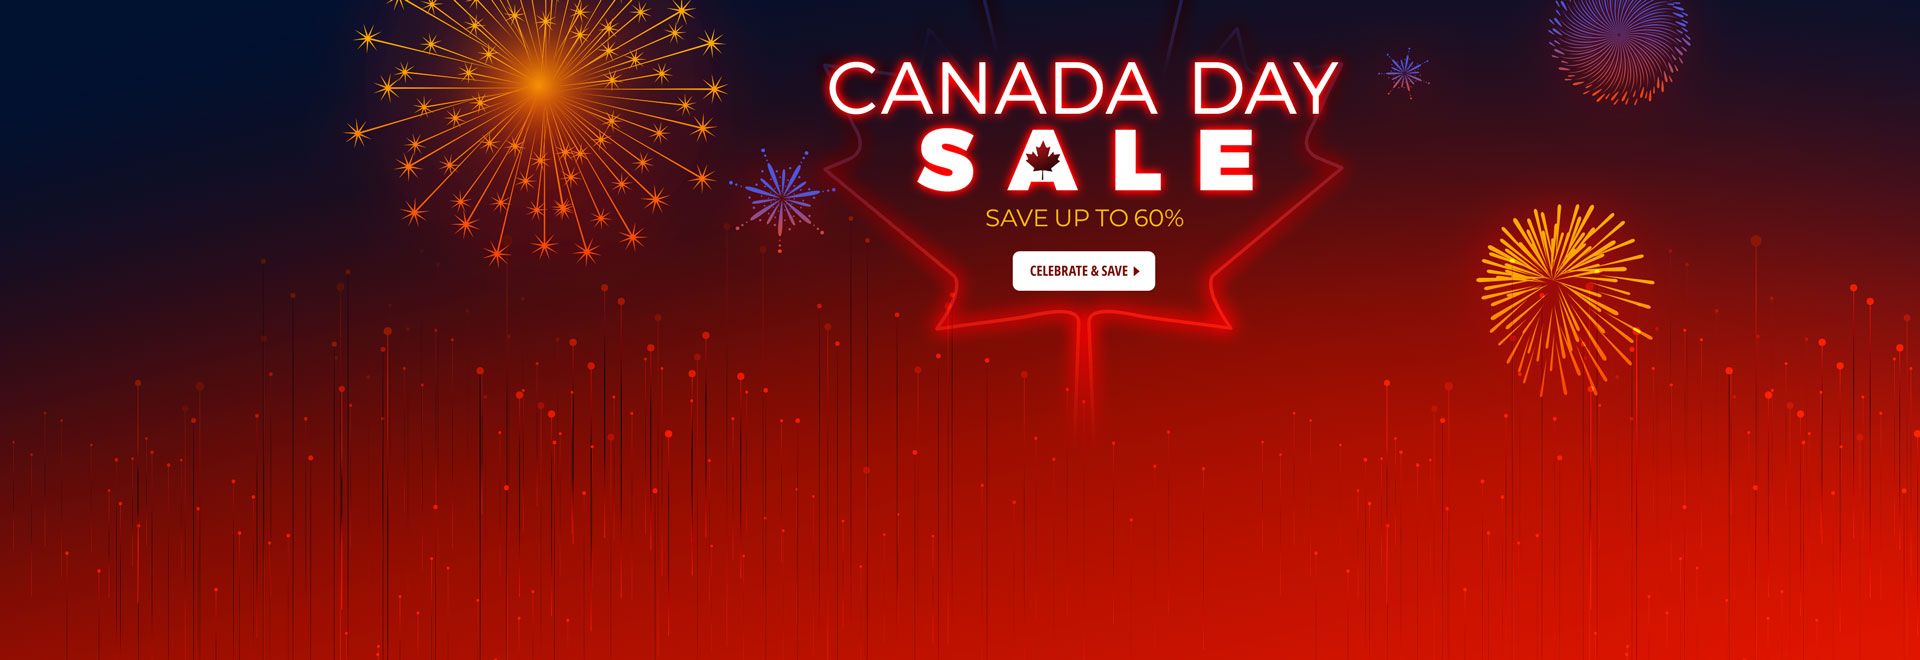 CANADA DAY SALE